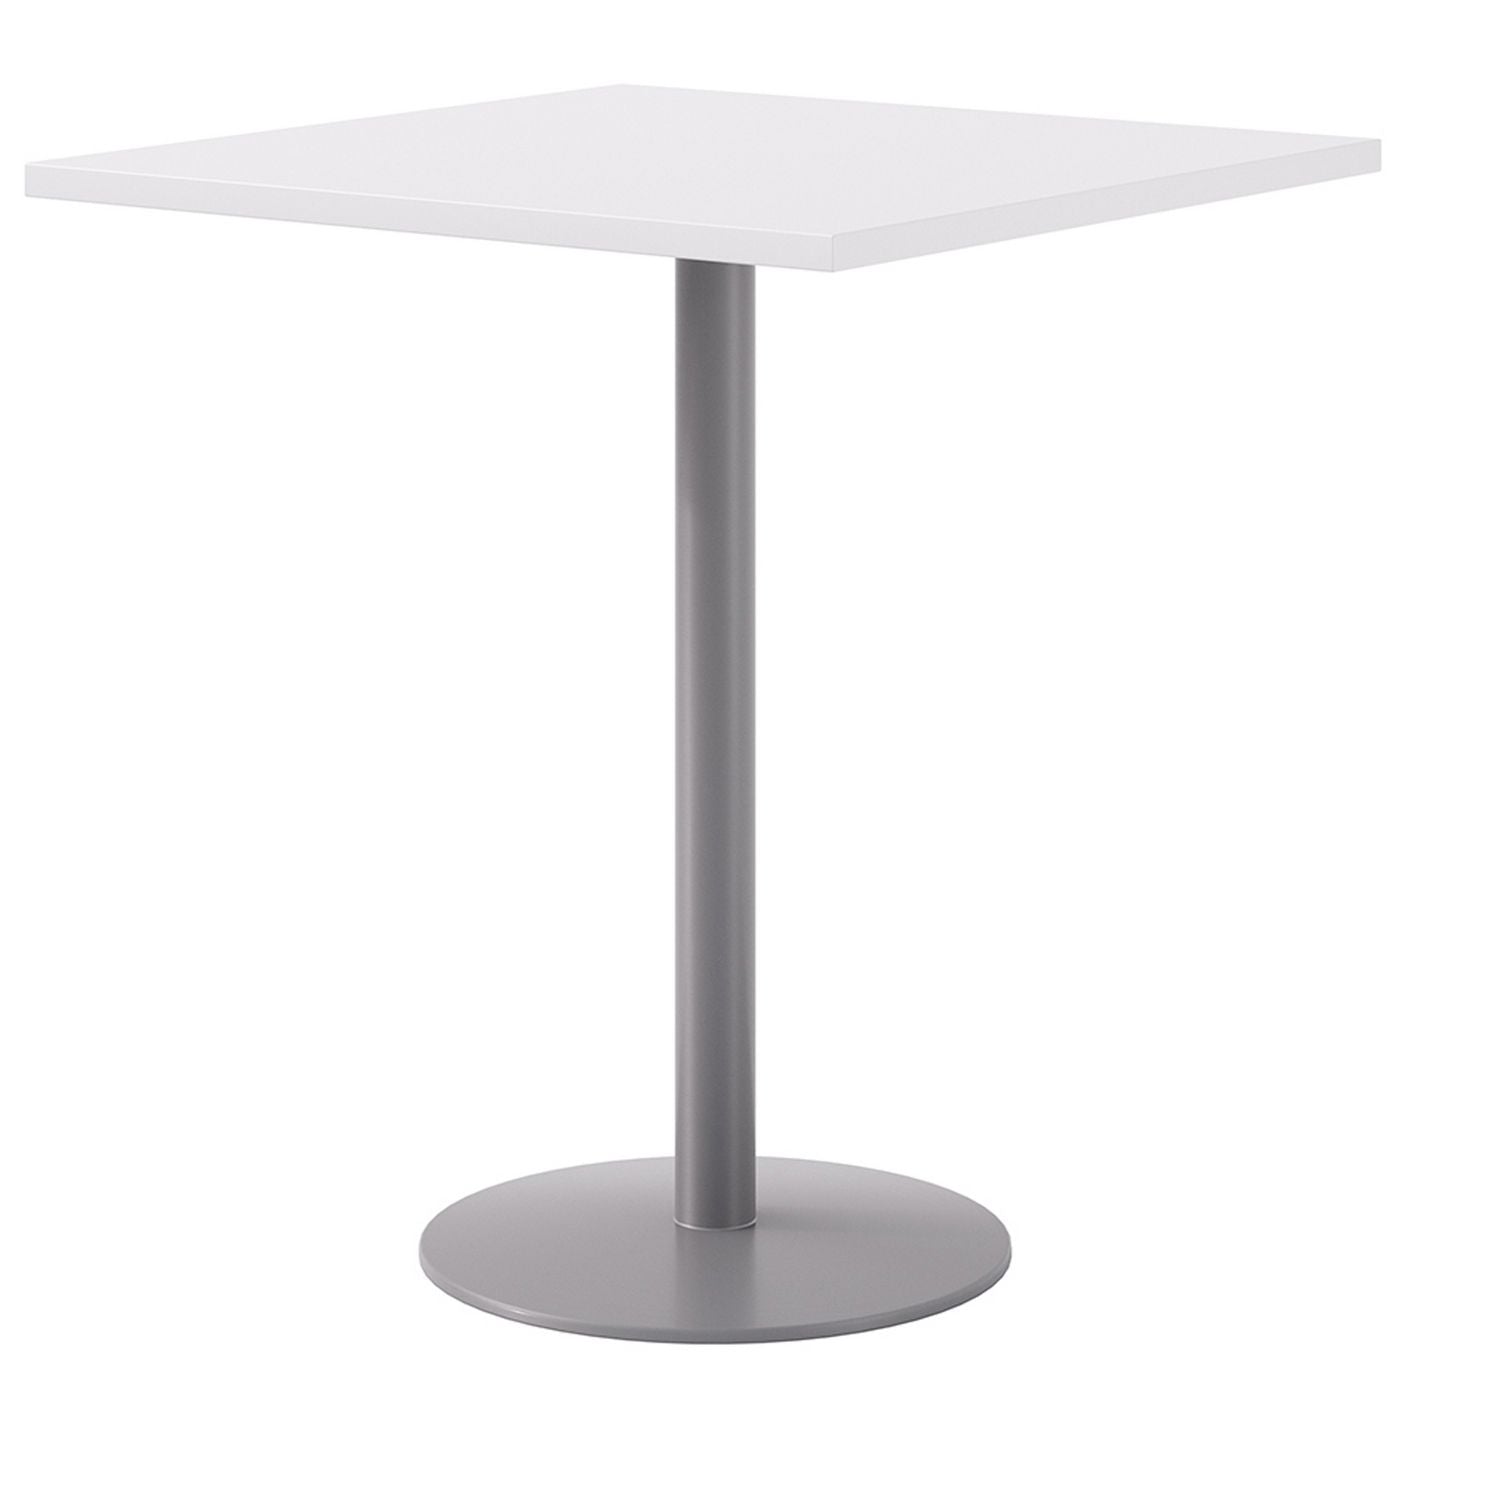 pedestal-bistro-table-with-four-white-jive-series-barstools-square-36-x-36-x-41-designer-white-ships-in-4-6-business-days_kfi811774039918 - 2